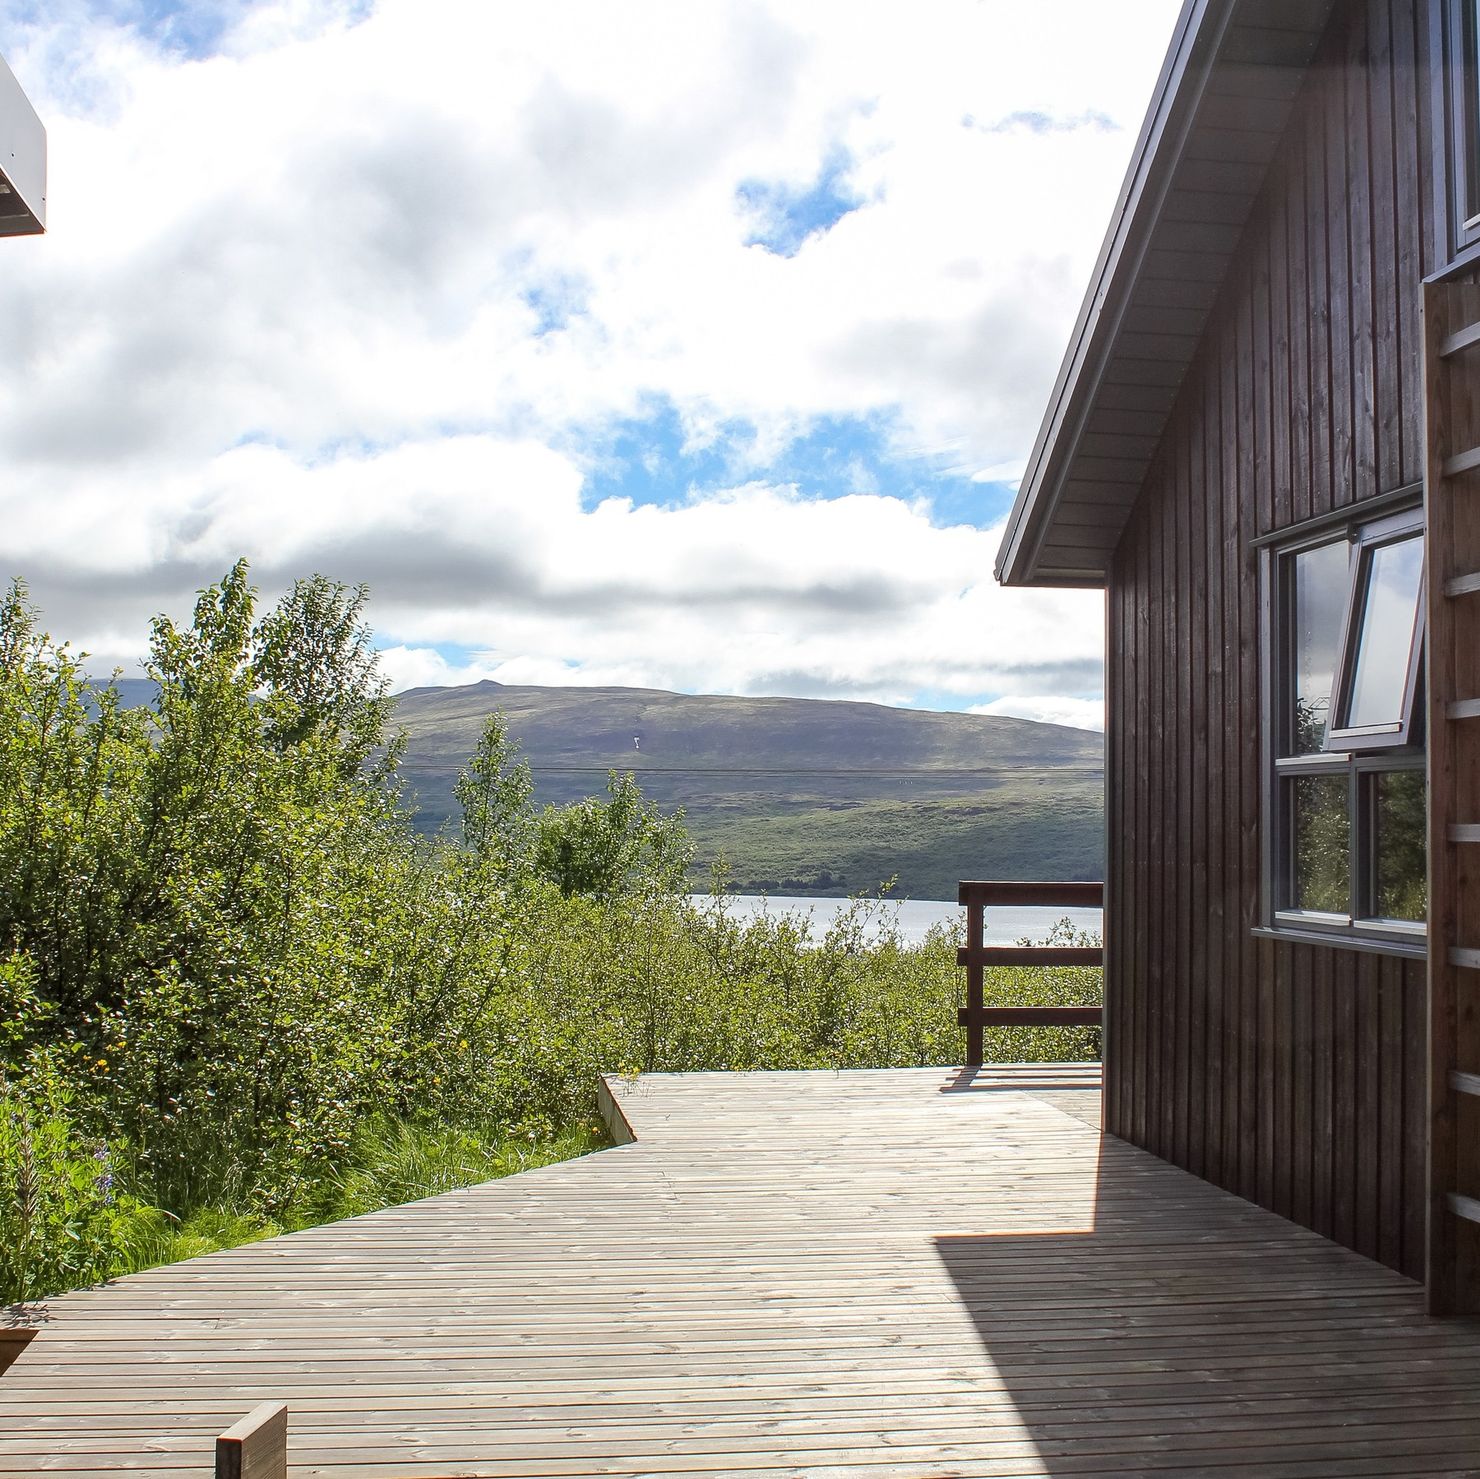 From the cottage you have a beautiful view of the lake Eyrarvatn